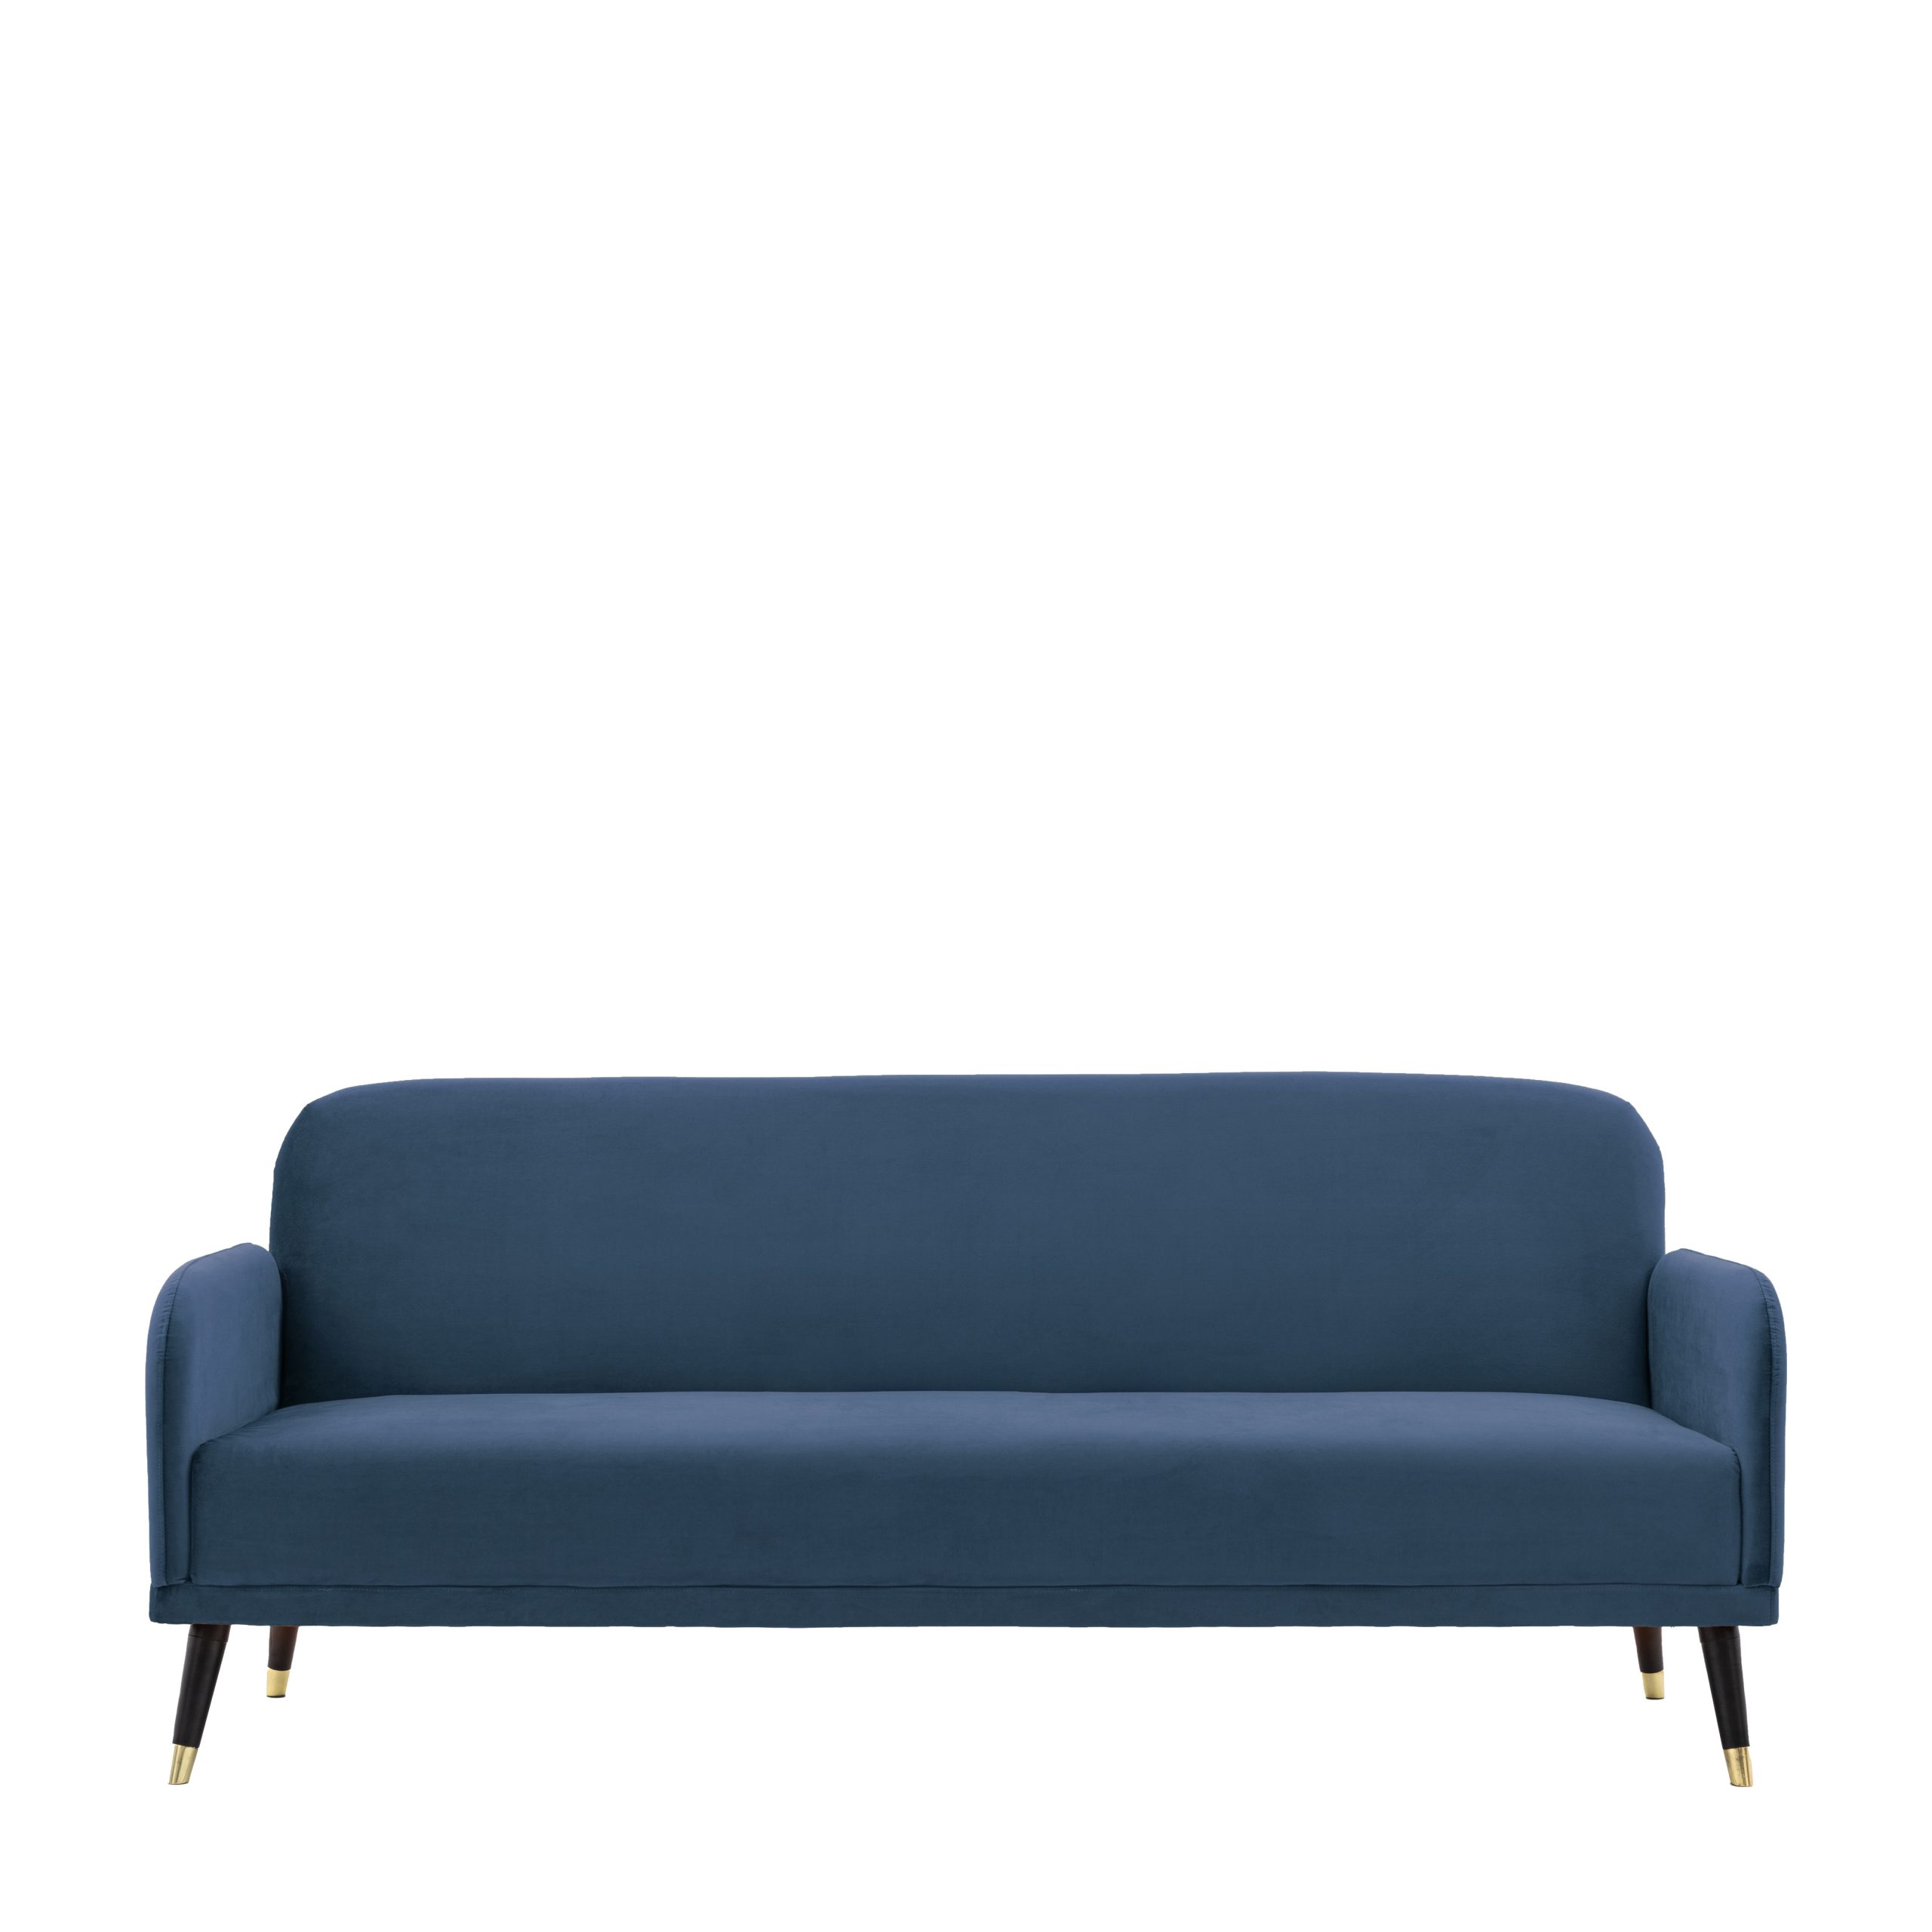 Gallery Direct Holt Sofa Bed Cyan